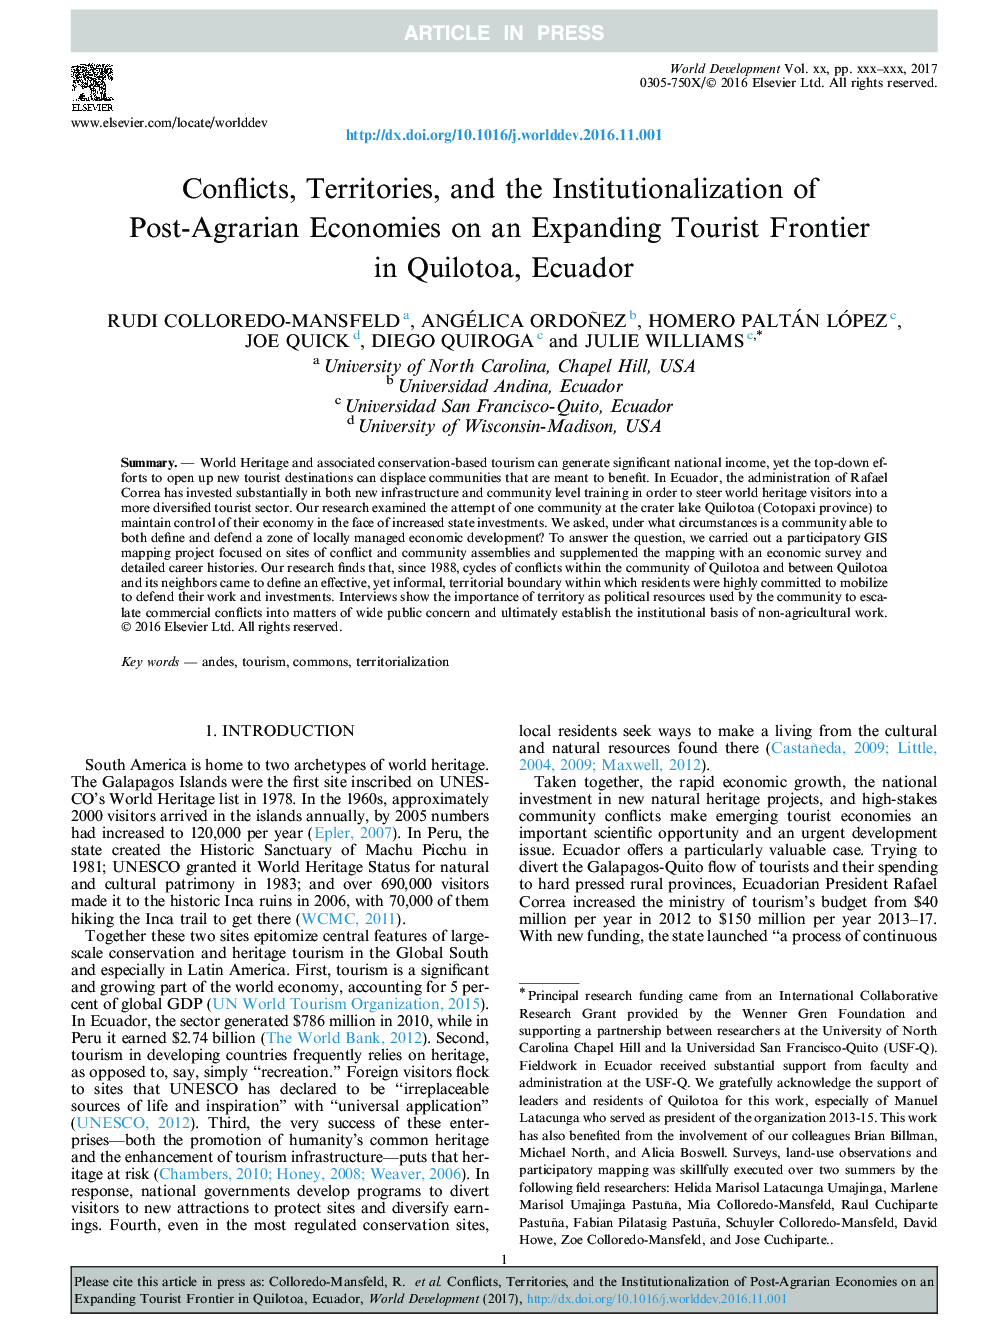 Conflicts, Territories, and the Institutionalization of Post-Agrarian Economies on an Expanding Tourist Frontier in Quilotoa, Ecuador